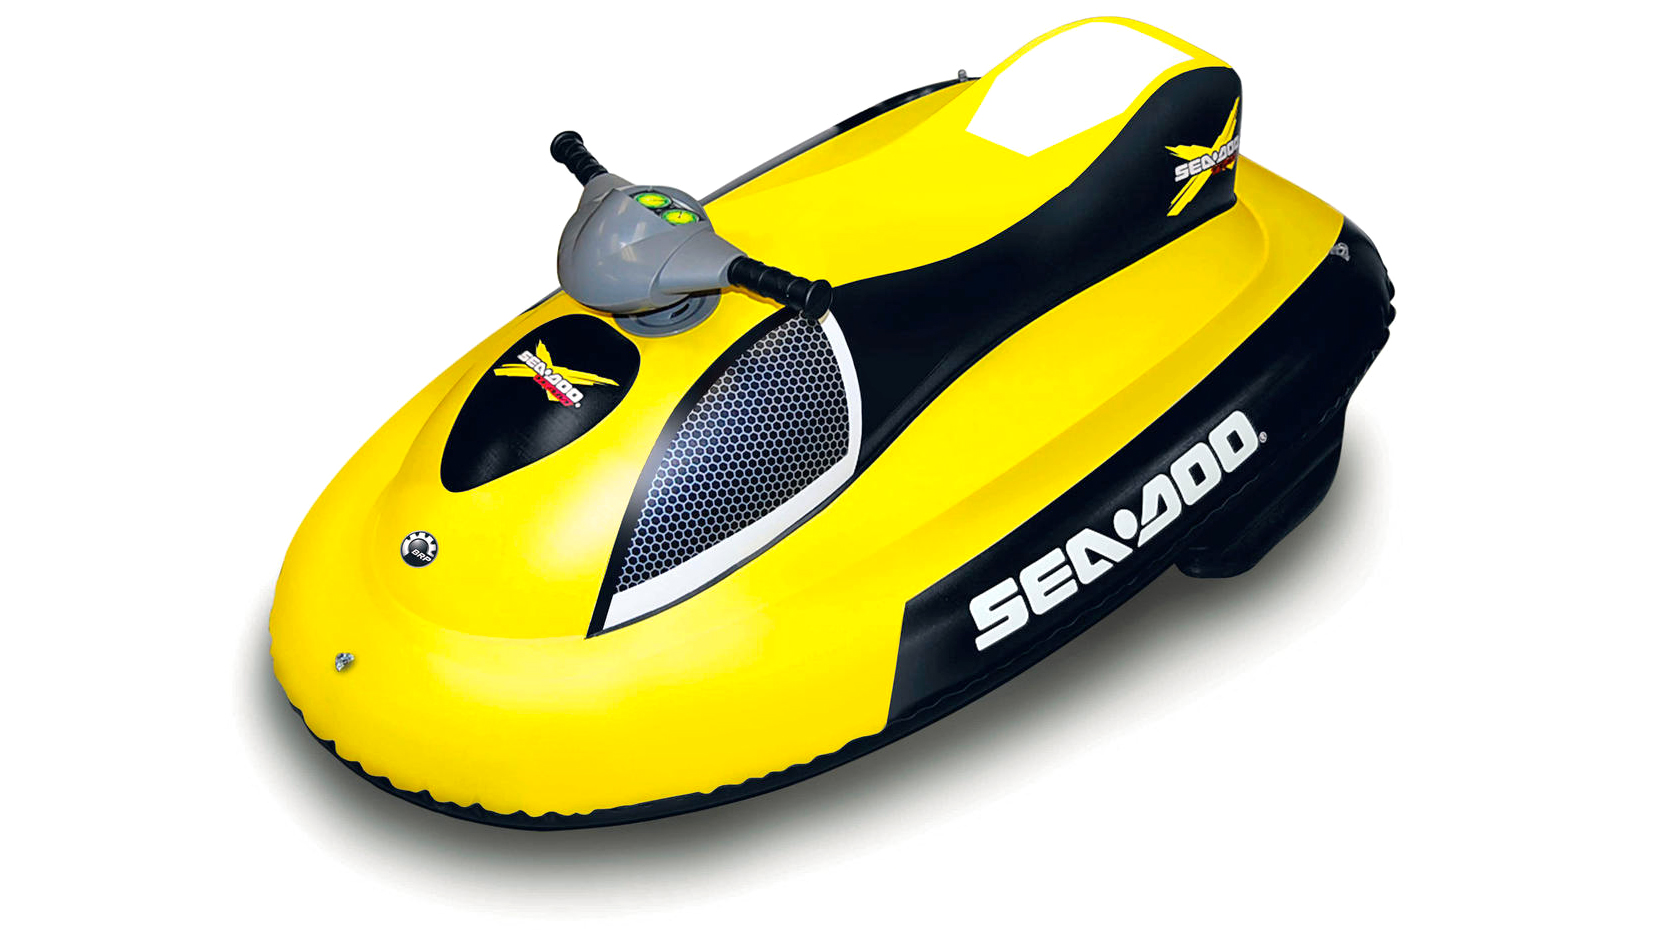 Inflatable Electric Sea-Doos Need To Exist In Adult Sizes